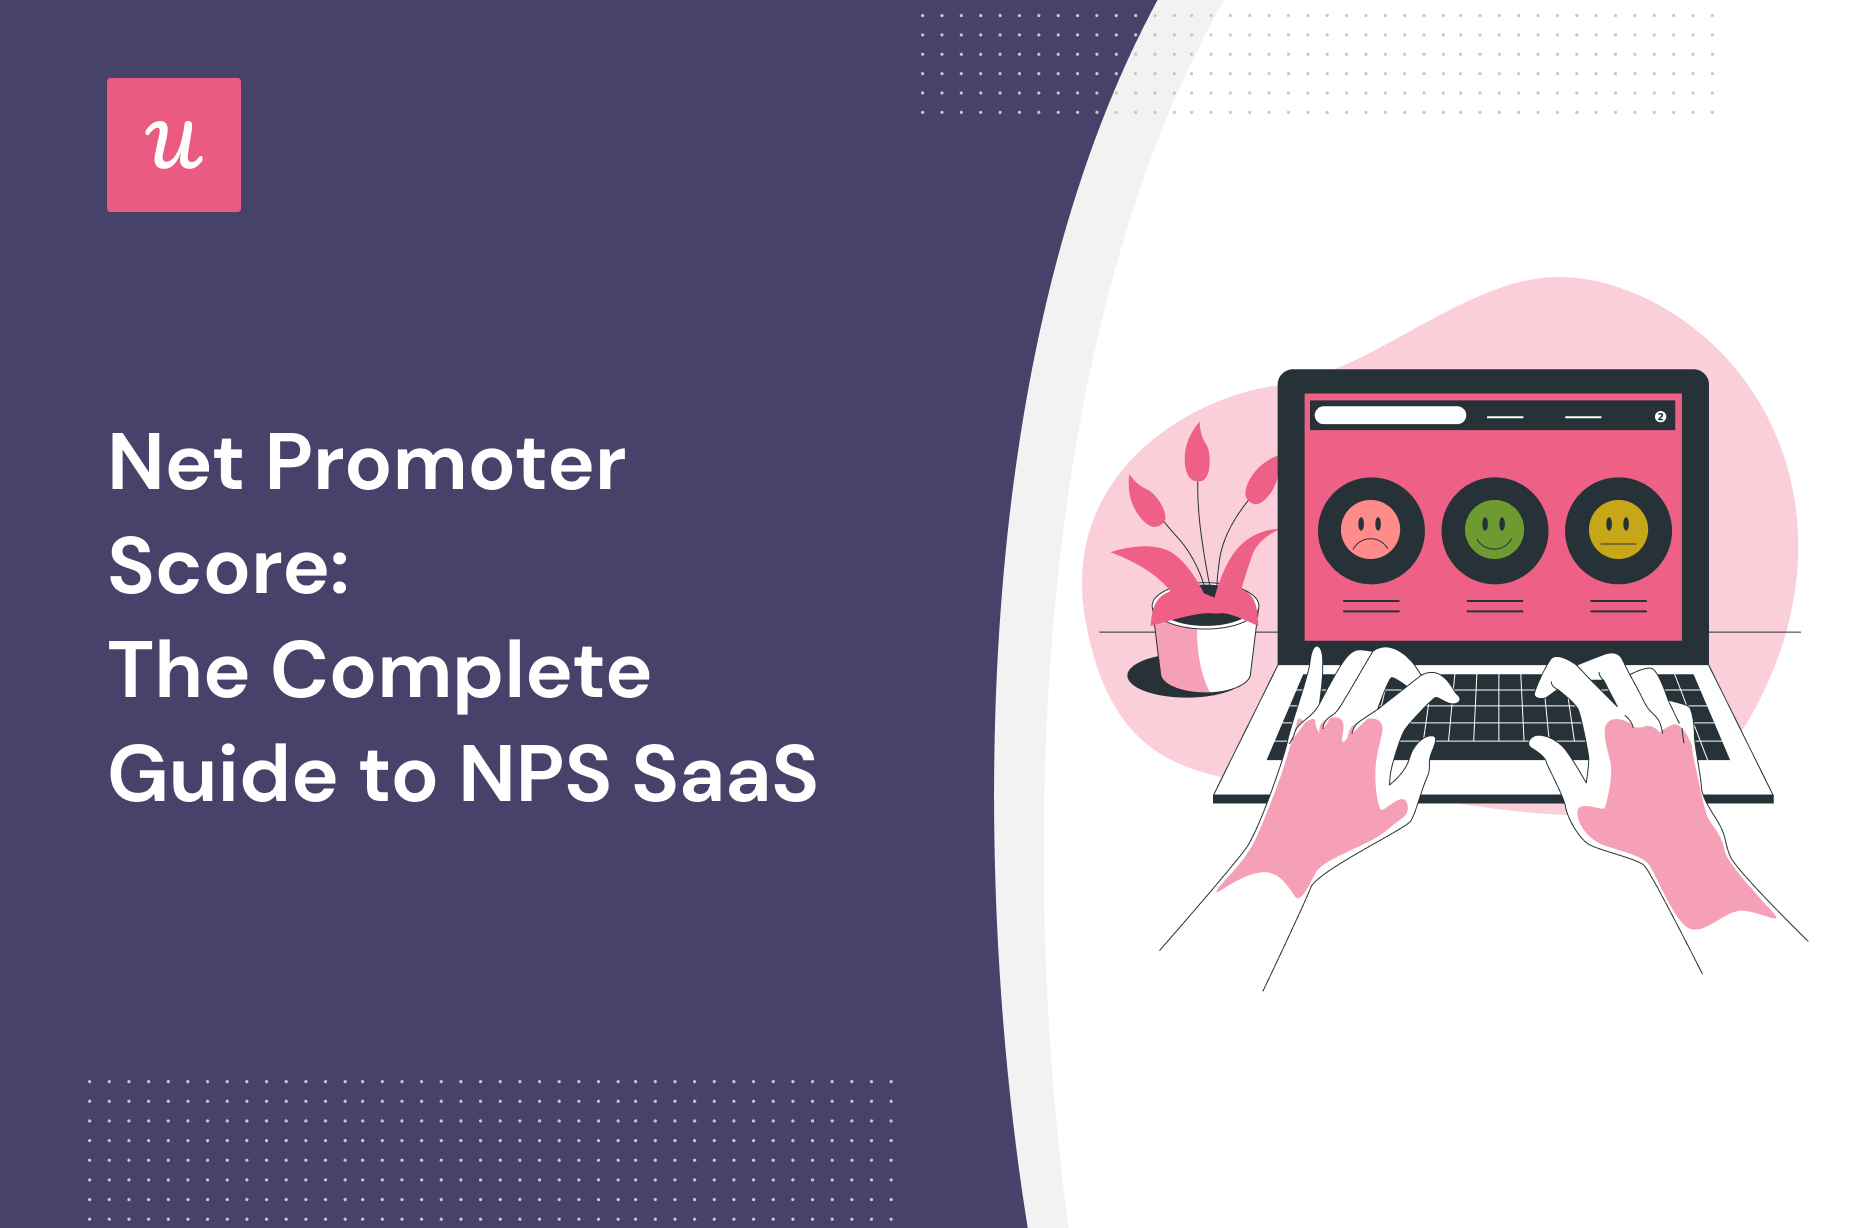 Net Promoter Score: The Complete Guide to NPS SaaS